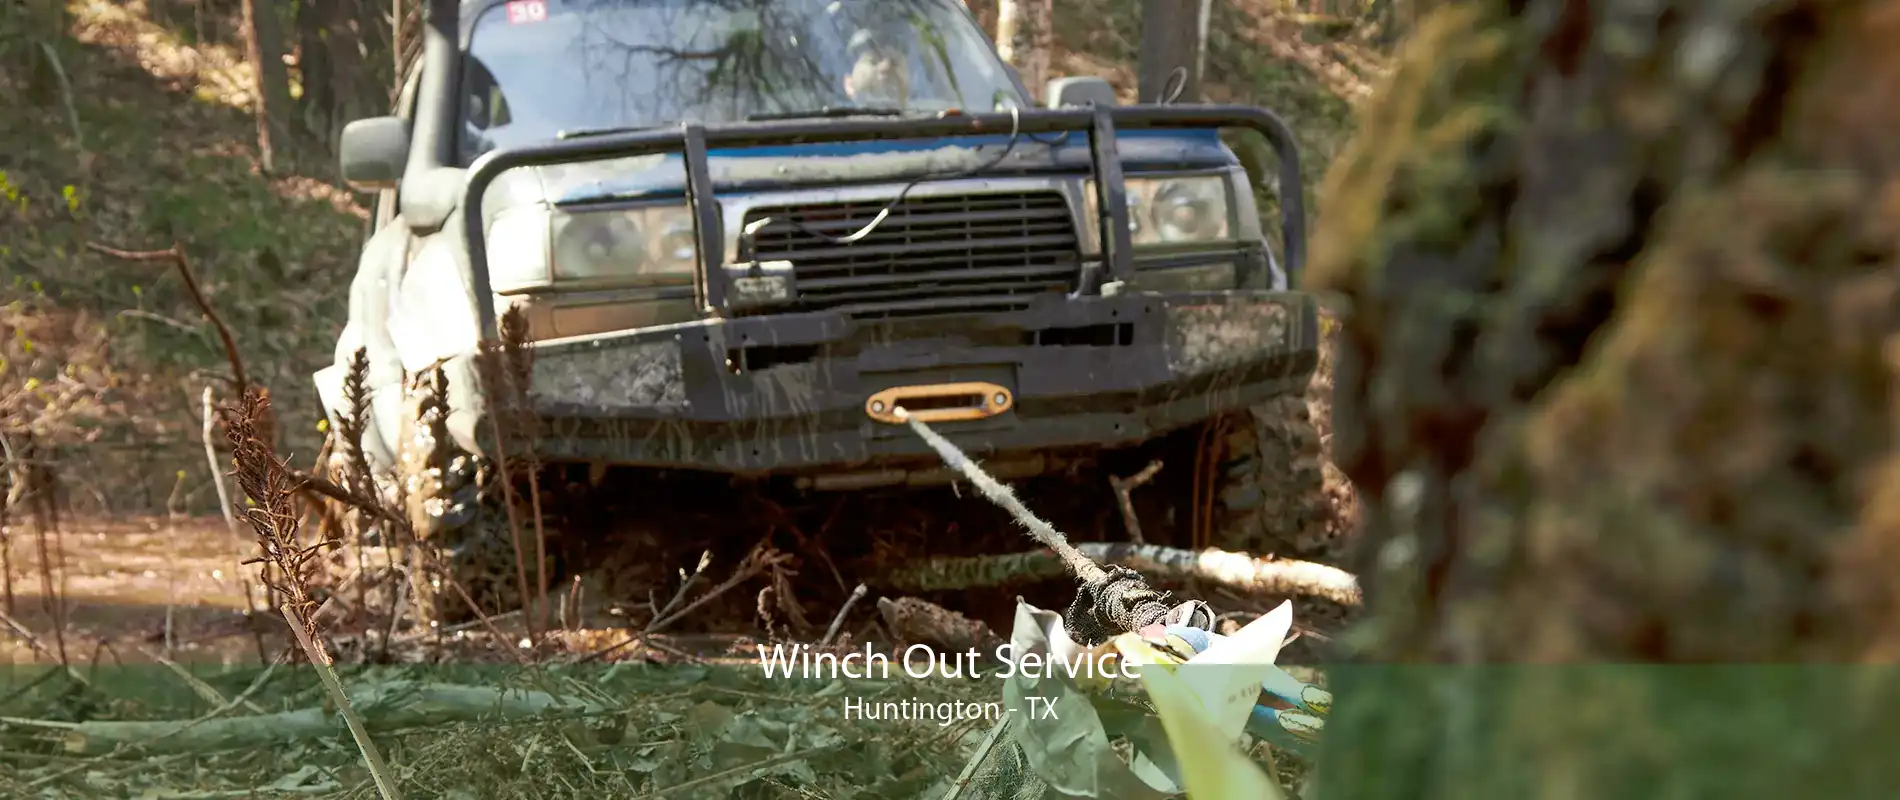 Winch Out Service Huntington - TX